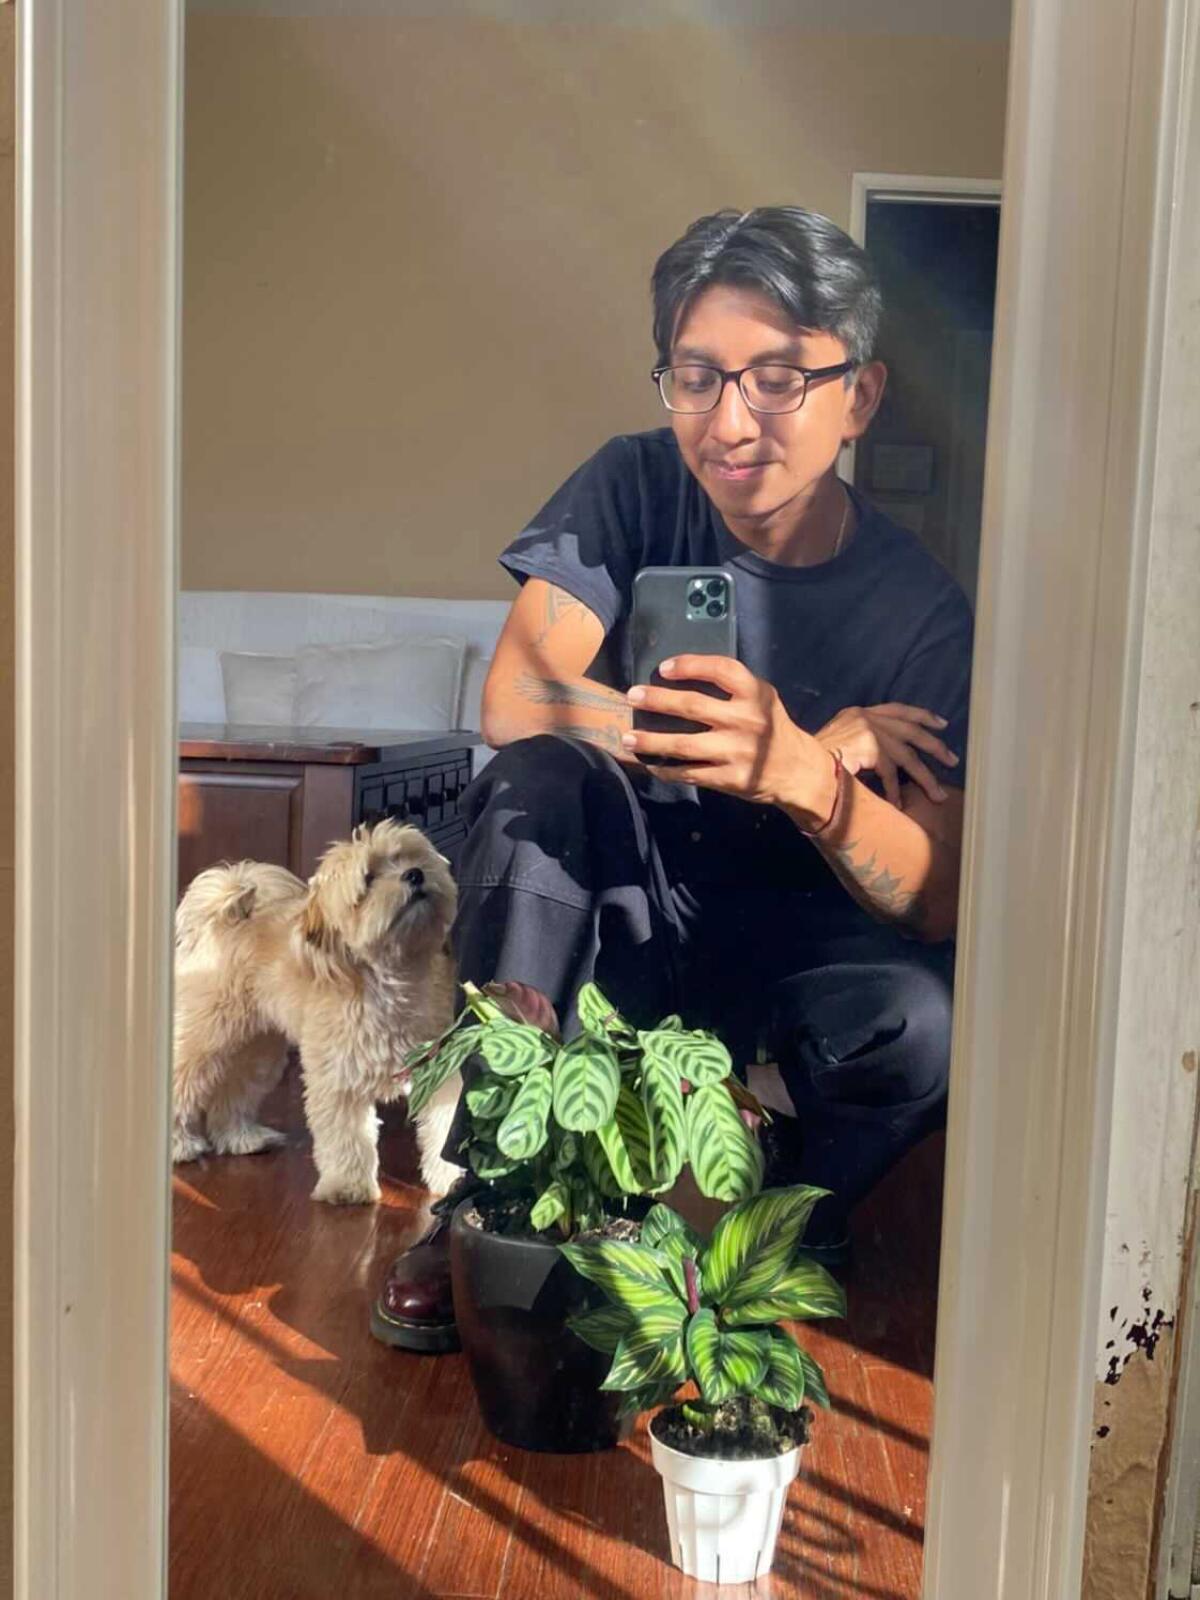 Reader Danny Lopez with his plants and dog